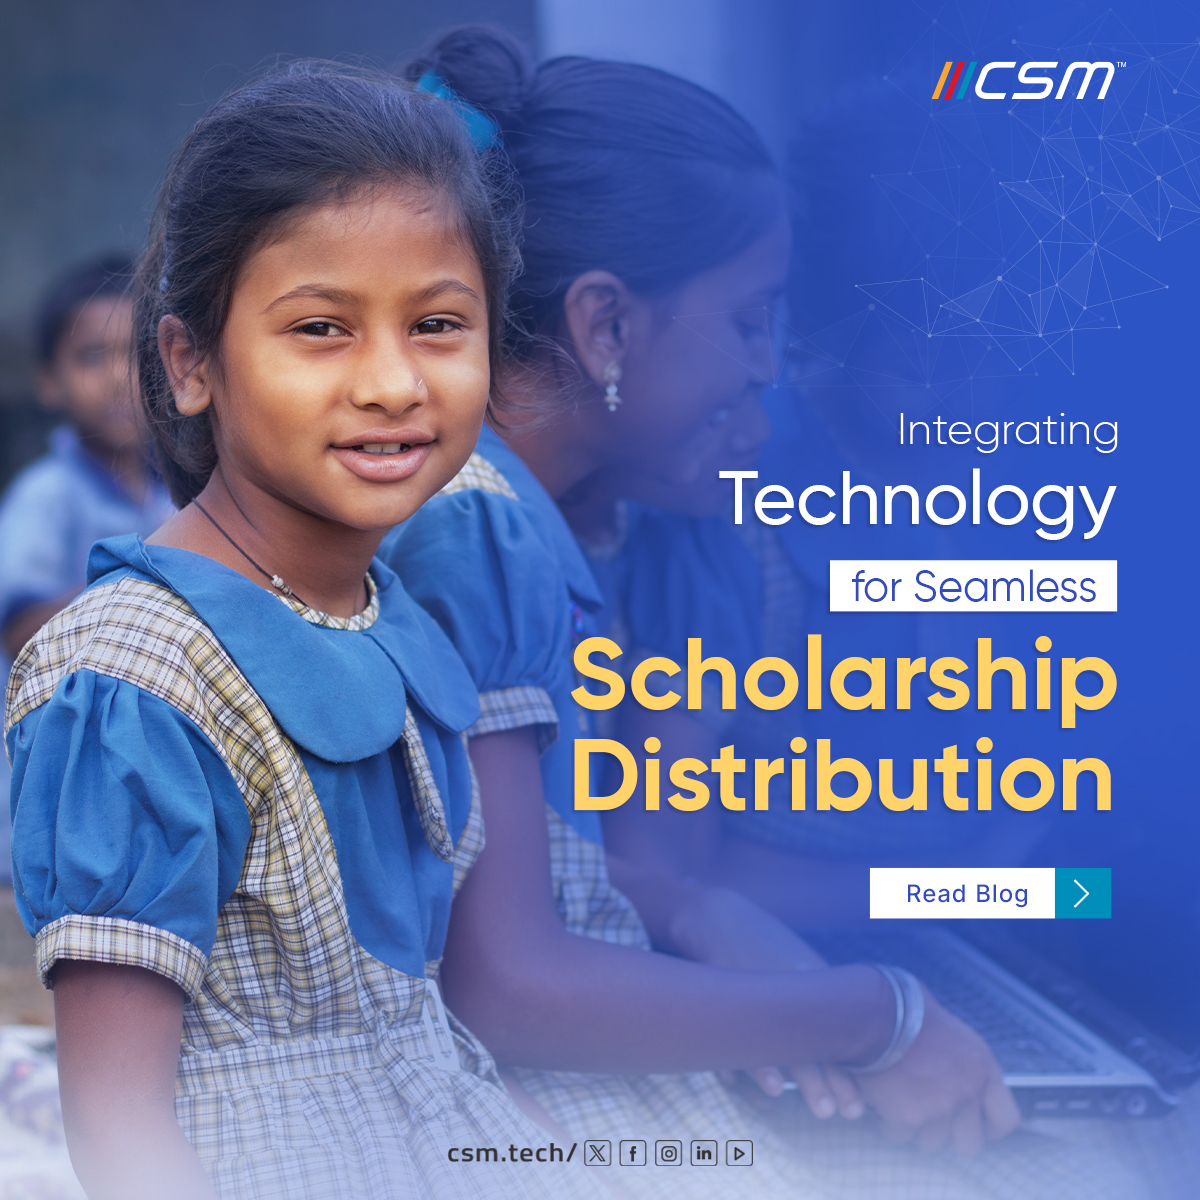 Learn more about how technology can transform outcomes in scholarship management.  

👉Read Blog: bit.ly/3UWHxXH 

#CSMTech #TransformingEducation #SustainableEducation #ScholarshipManagement